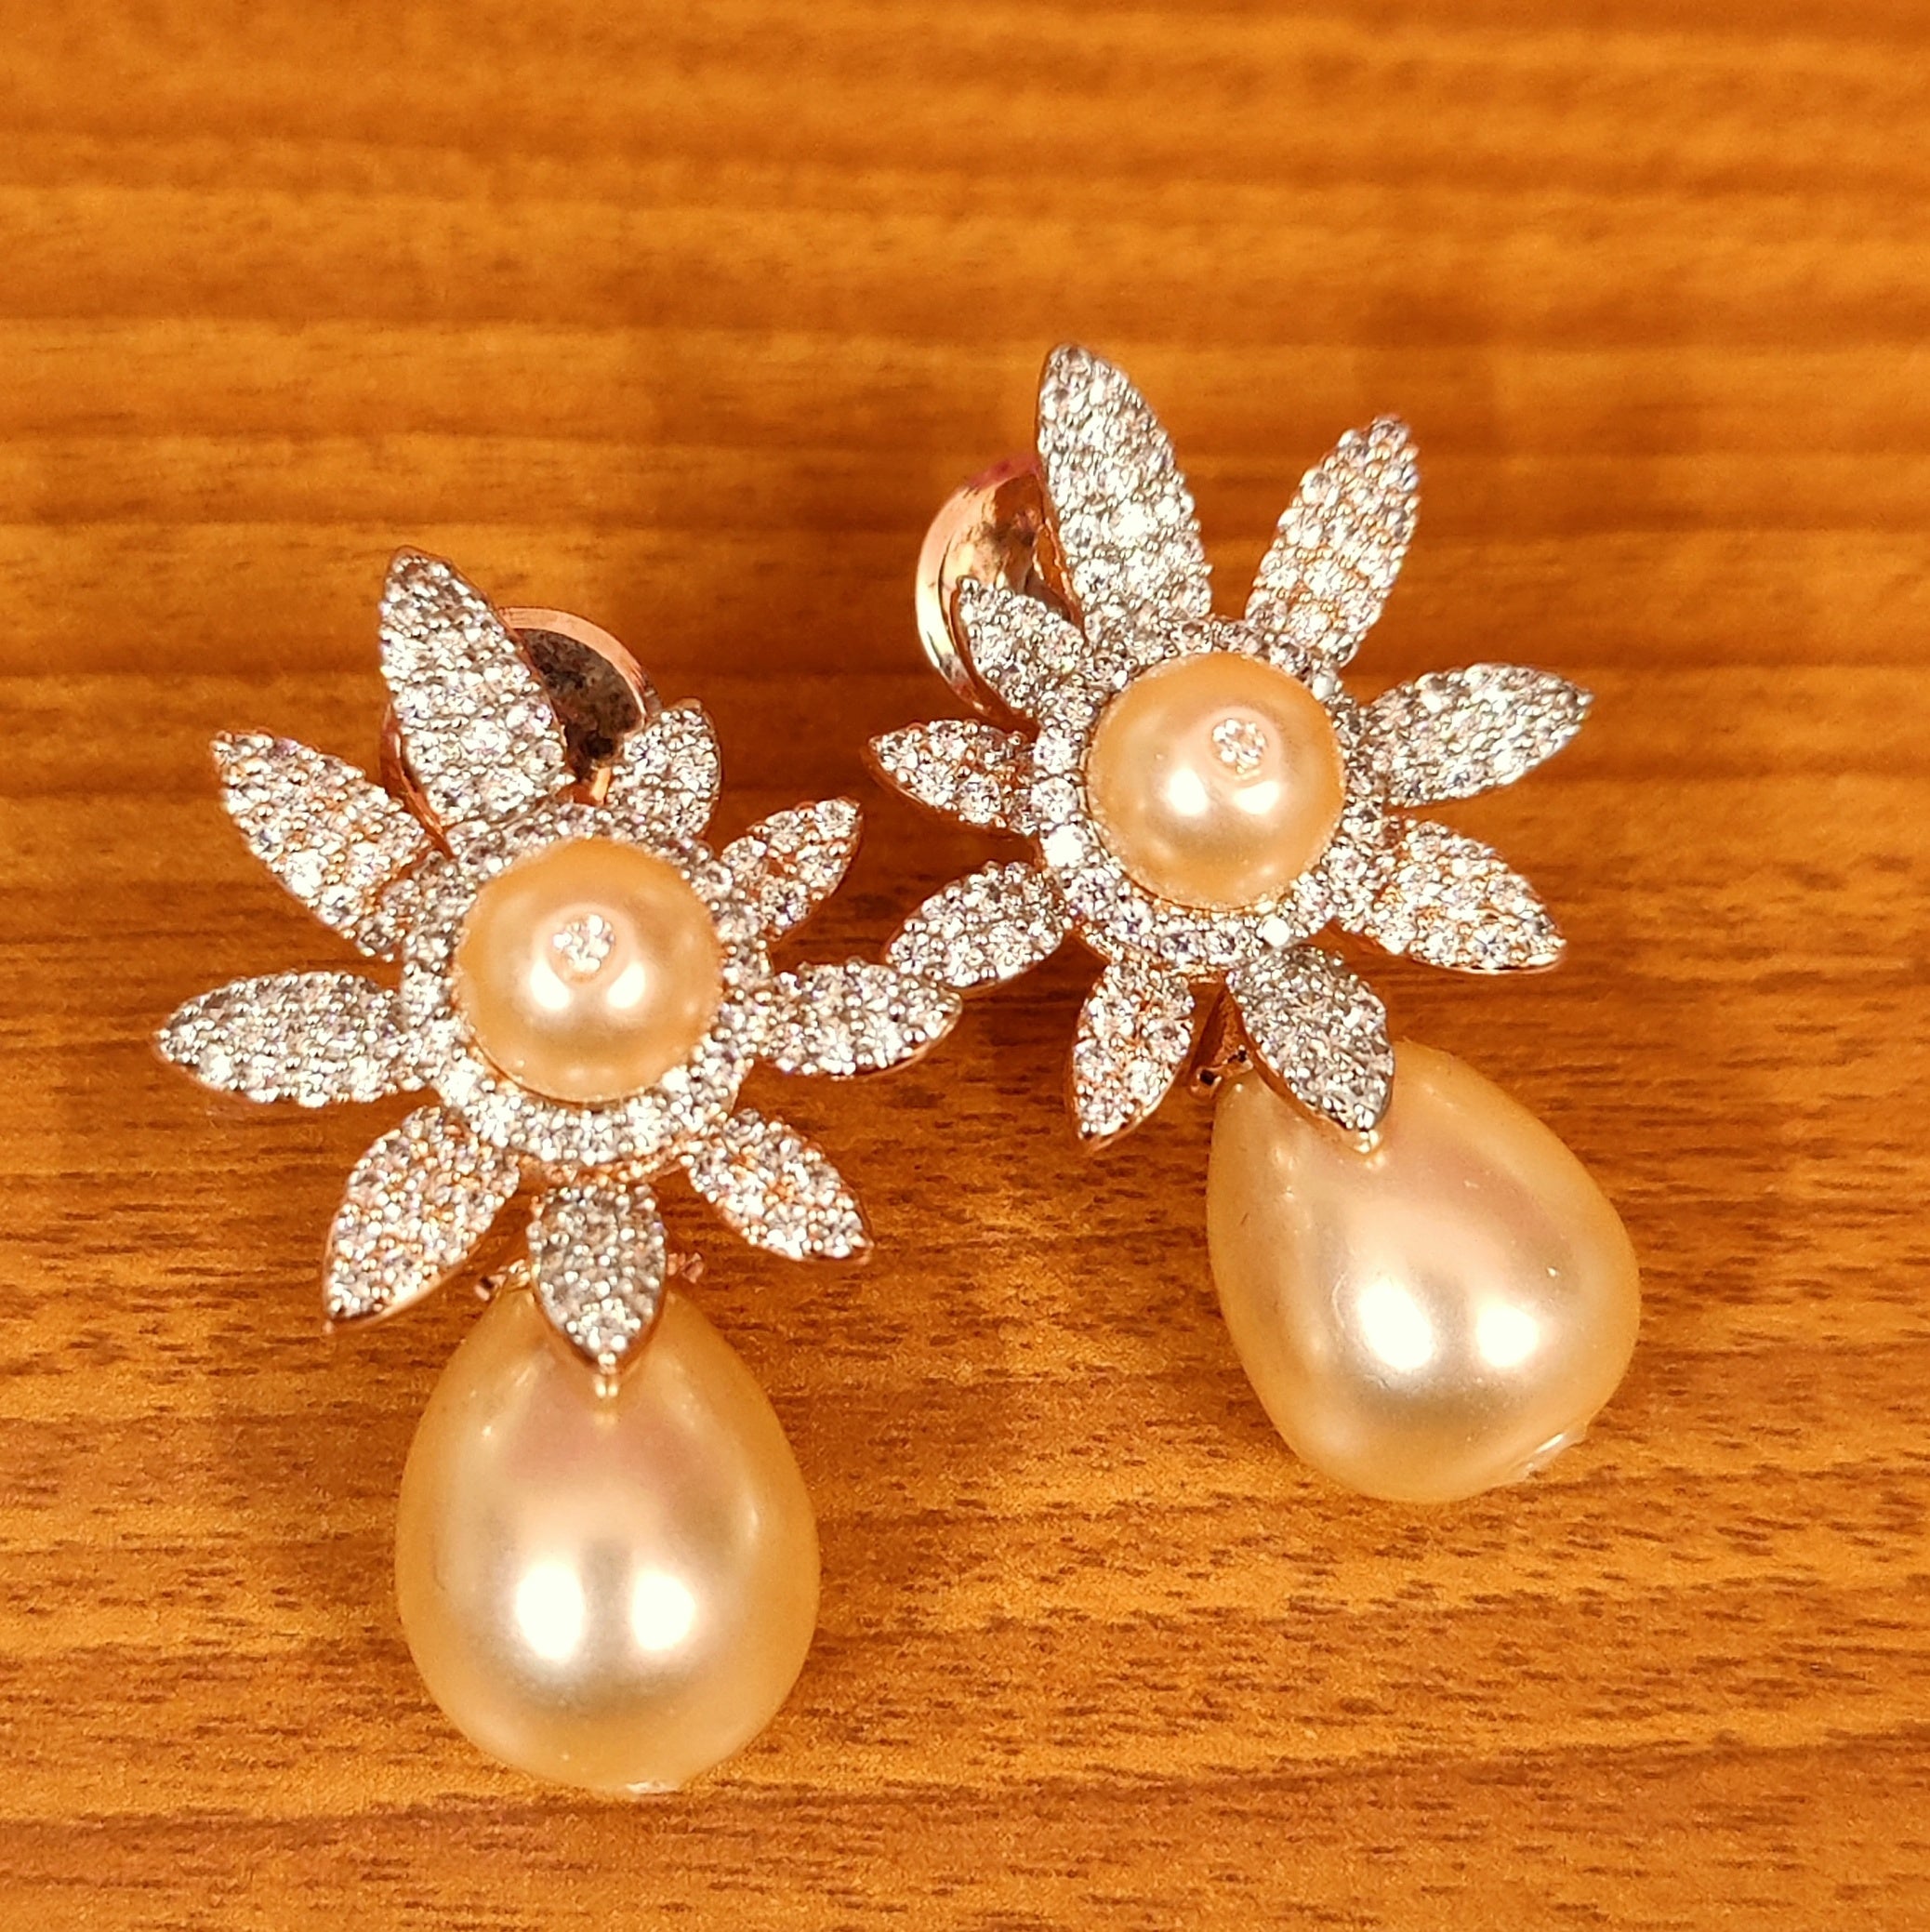 Adorable Emerald Pearl Earrings - Best Place to Buy Real Pearls Online